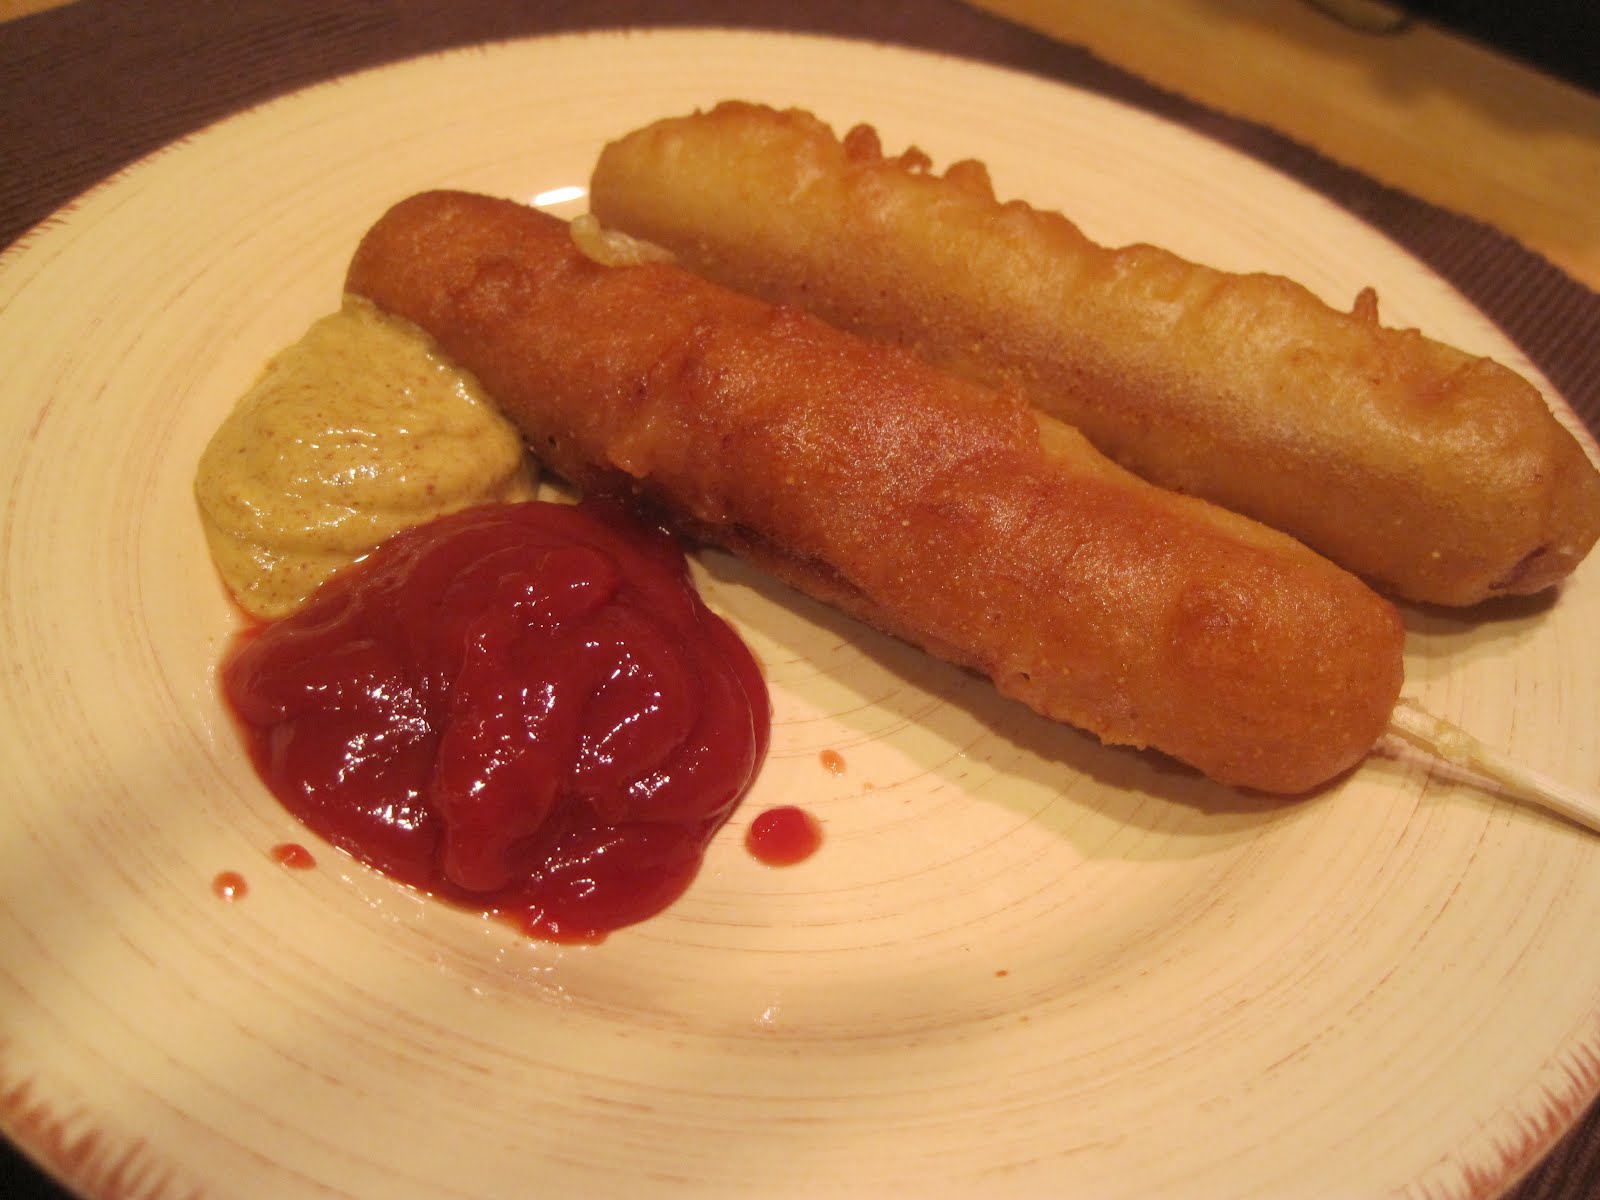 For corn Two: Table make with &  dogs cheese dogs stick. .corn on how to a batter pancake